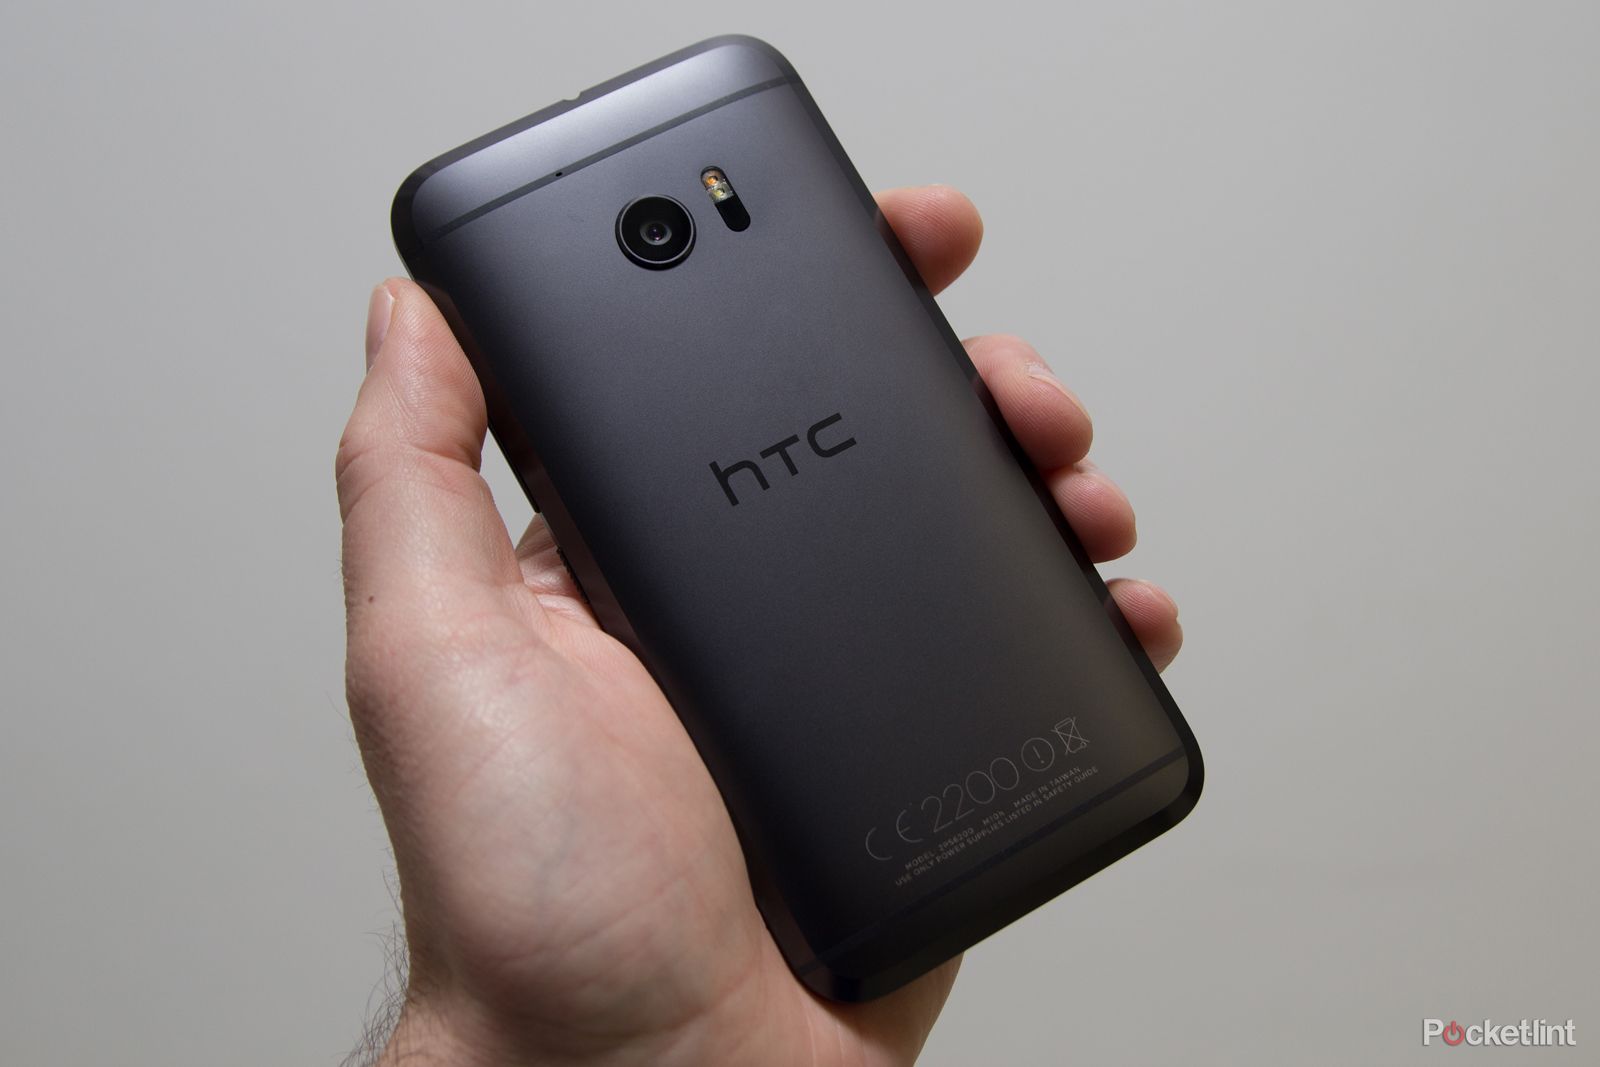 htc 10 tips and tricks the ultimate guide to your htc phone image 1